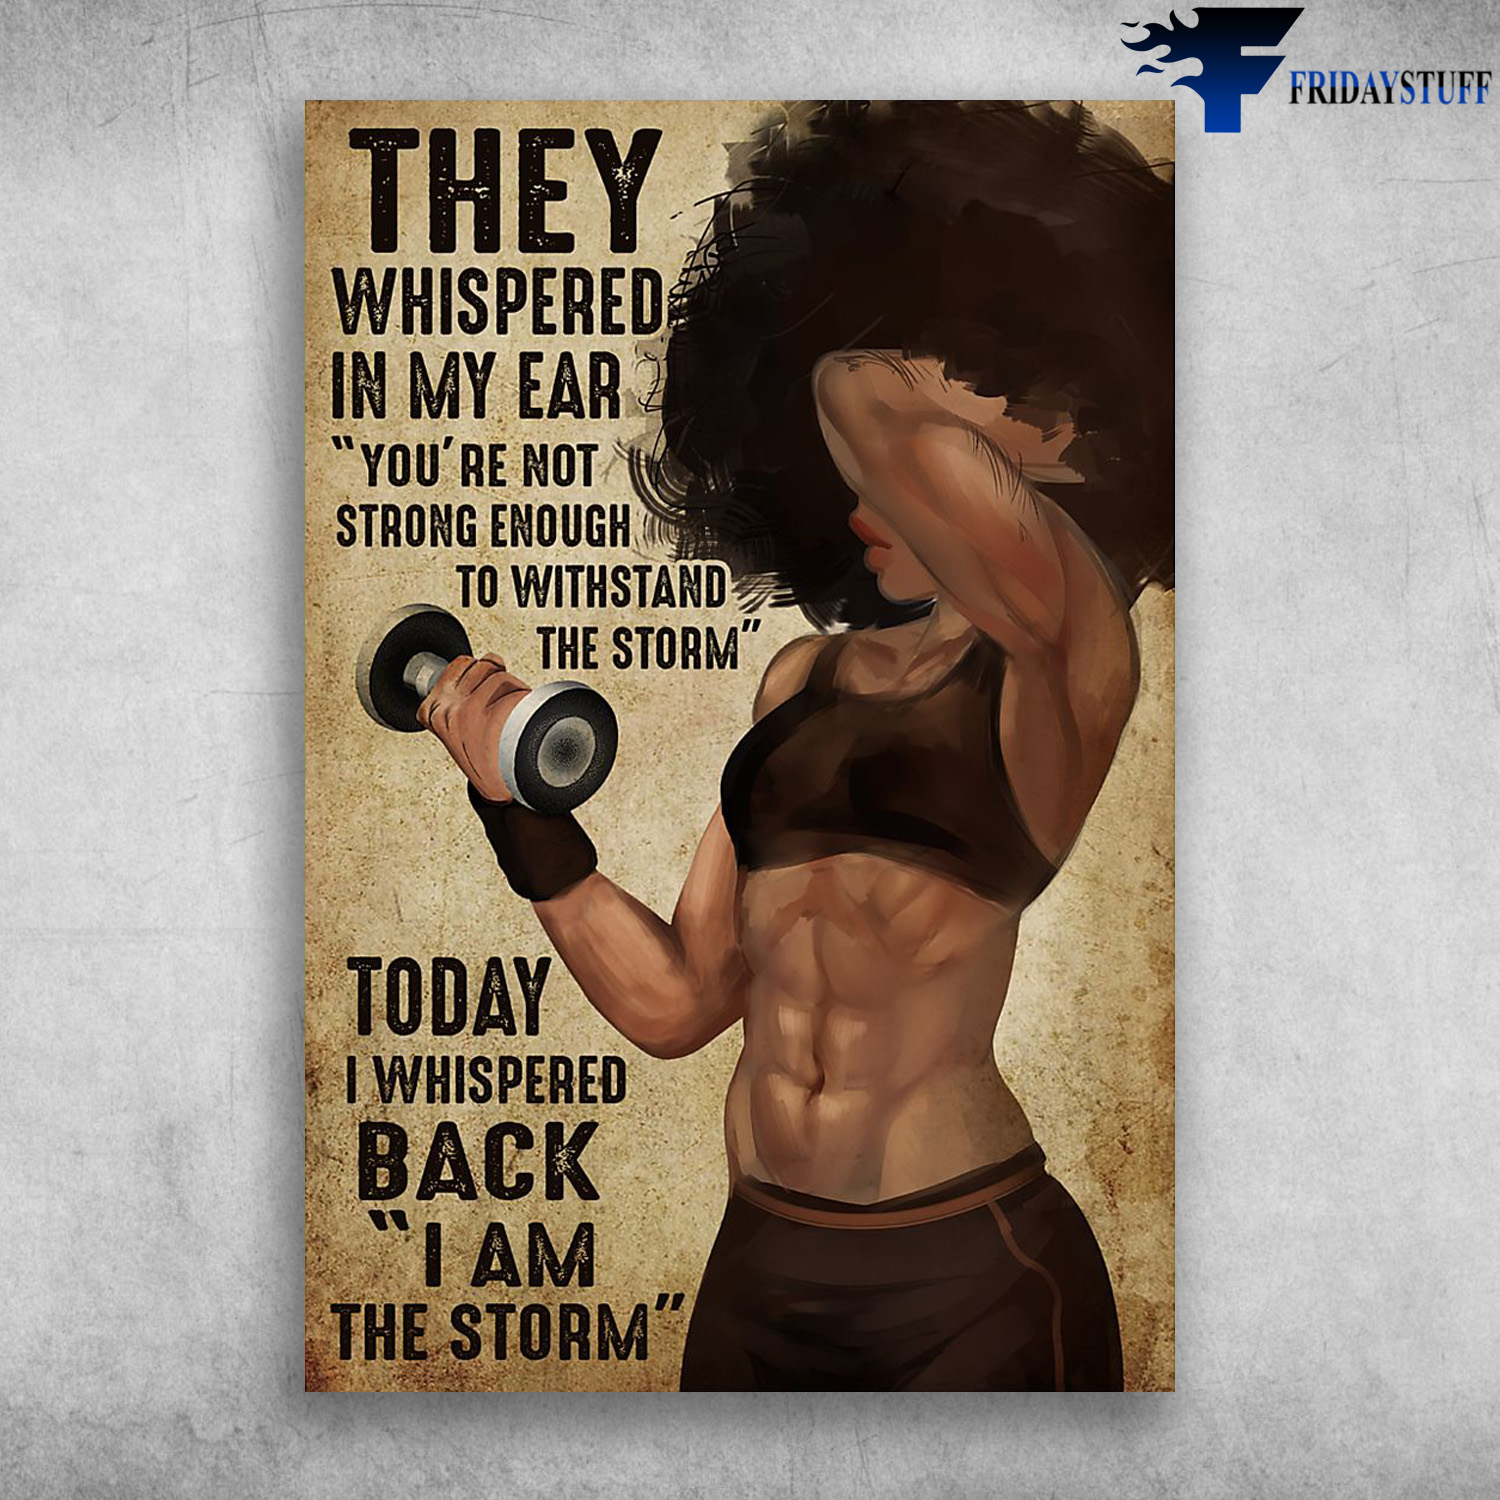 Gym Girl - They Whispered In My Ear, You're Not Strong Enough, To Withstand The Storm, Today, I Whispered Back, I Am The Storm